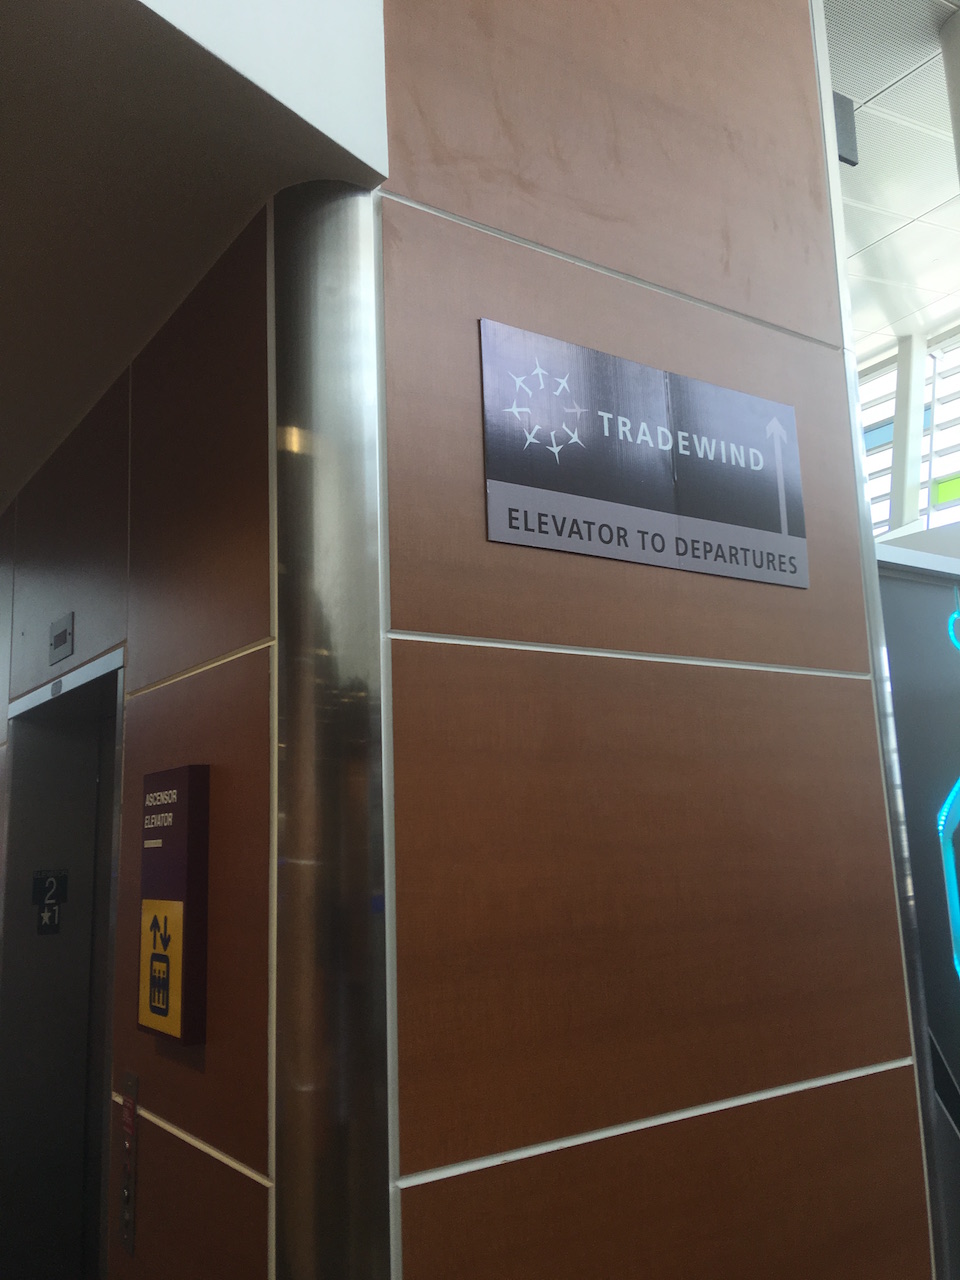 Find this elevator at San Juan airport Terminal B and the rest is easy.